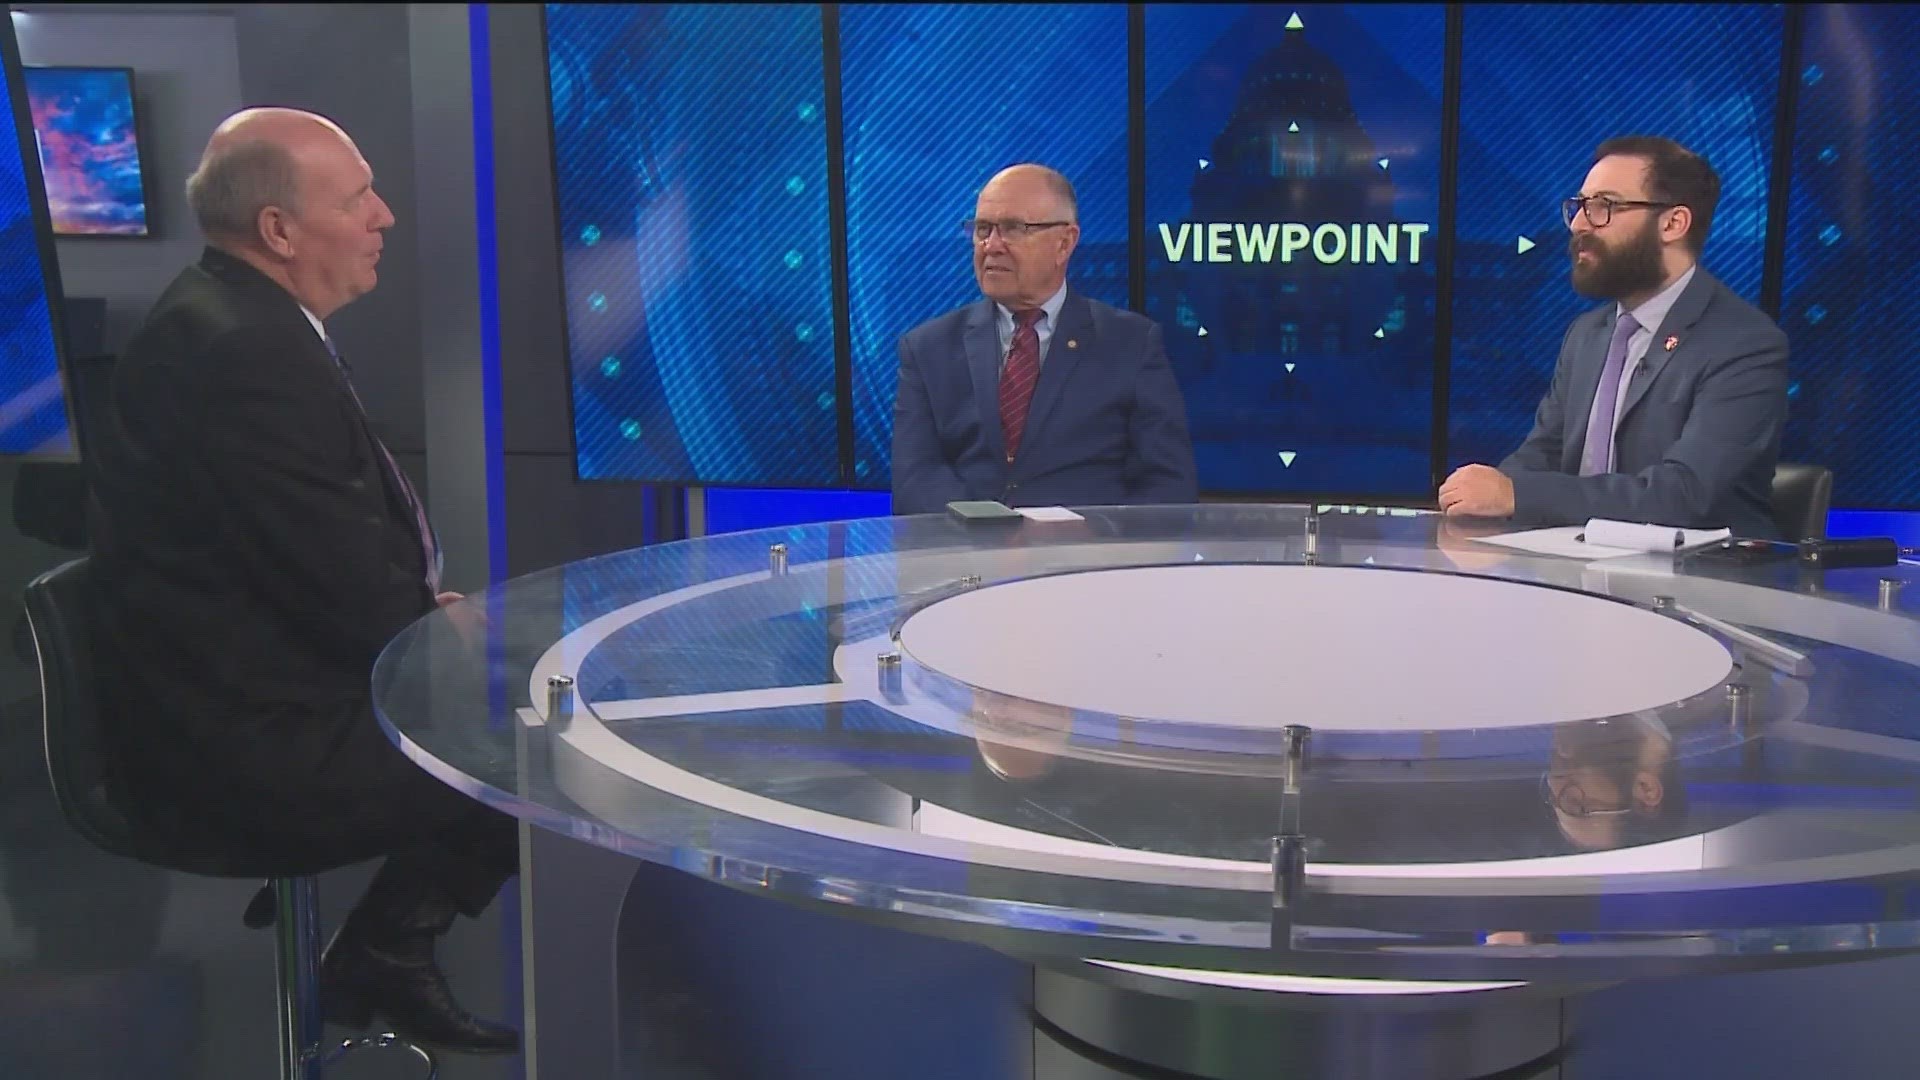 On Sunday at 9 a.m. on KTVB Channel 7, Democratic and Republican lawmakers will recap the Idaho Legislature's work with Joe Parris on Viewpoint.